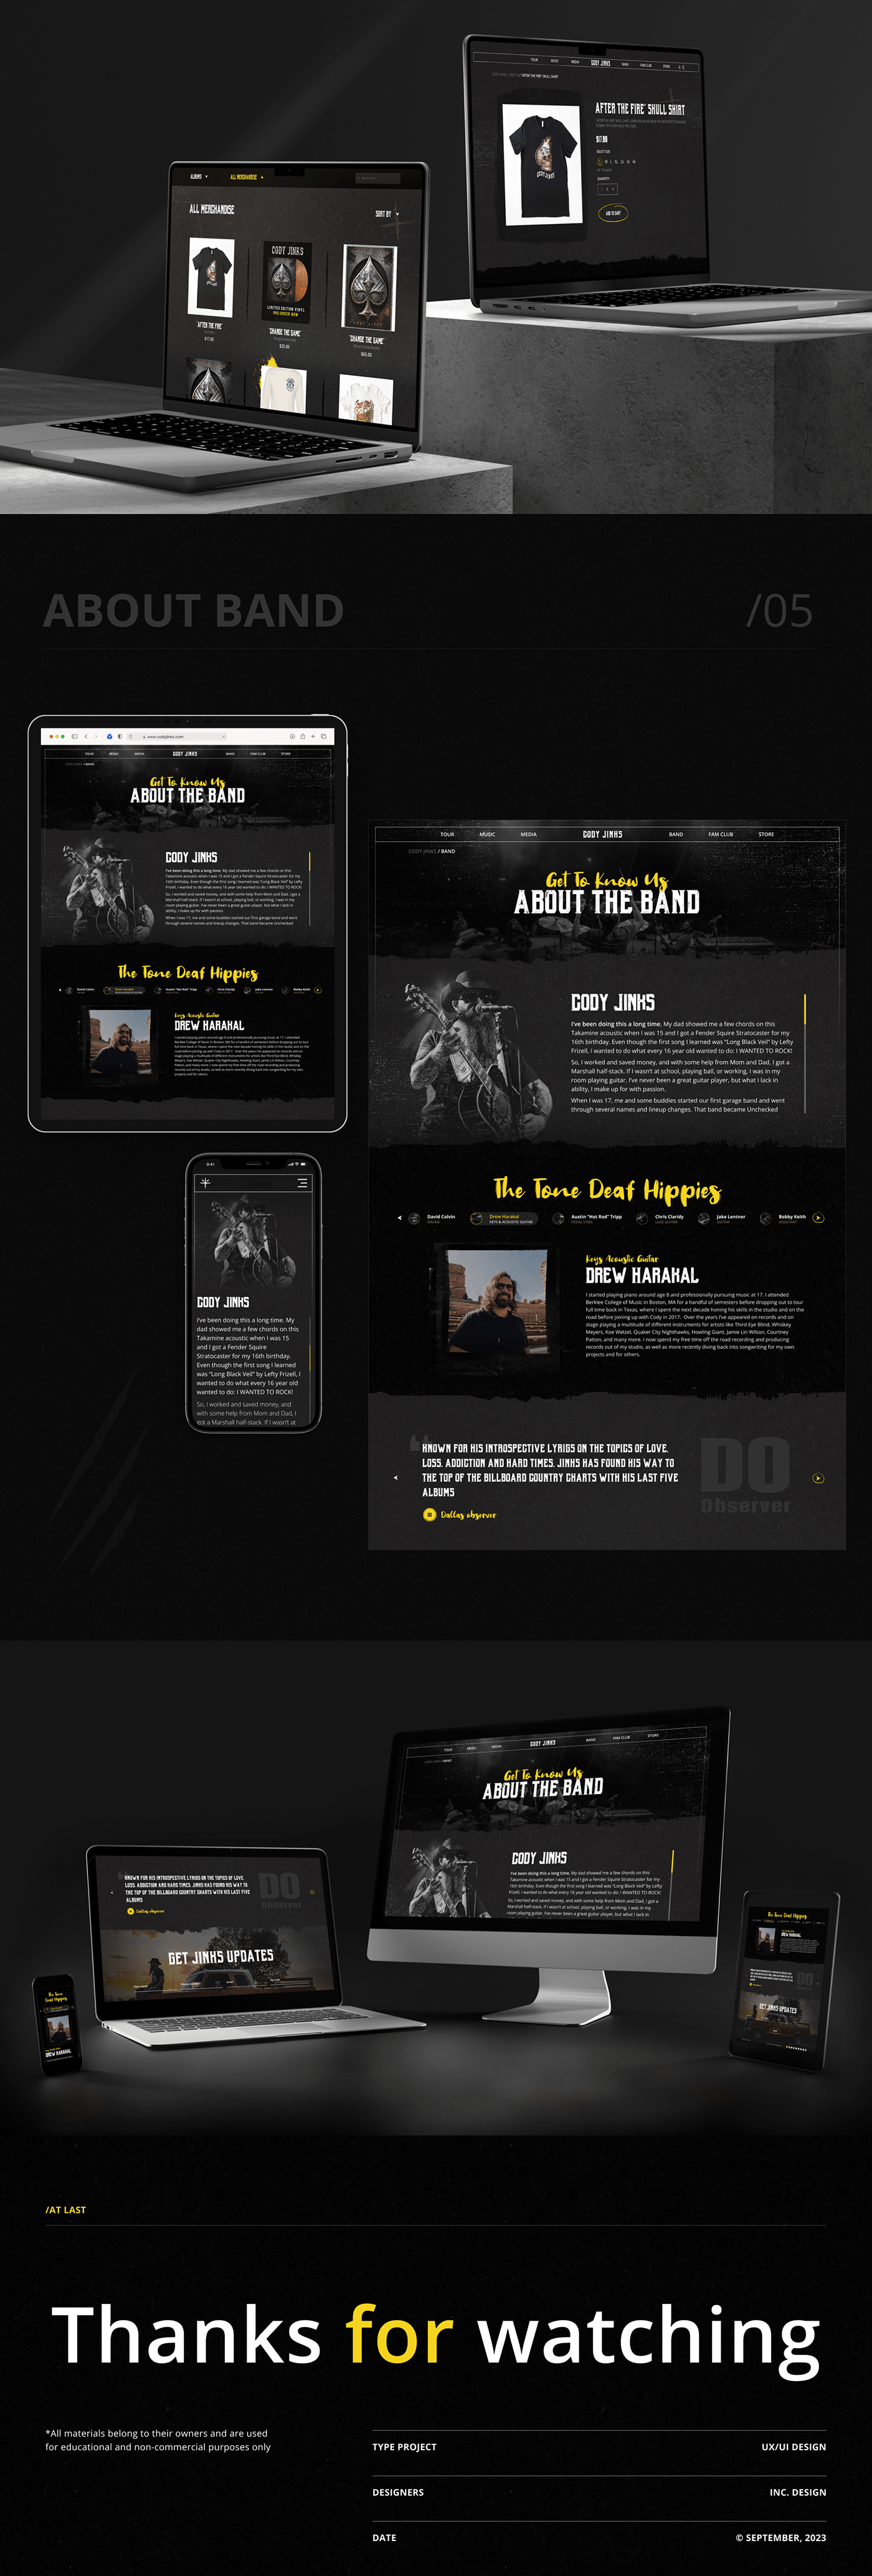 music Country Music rock band aesthetics cowboy musician website Unique musical identity homepage design Online platform